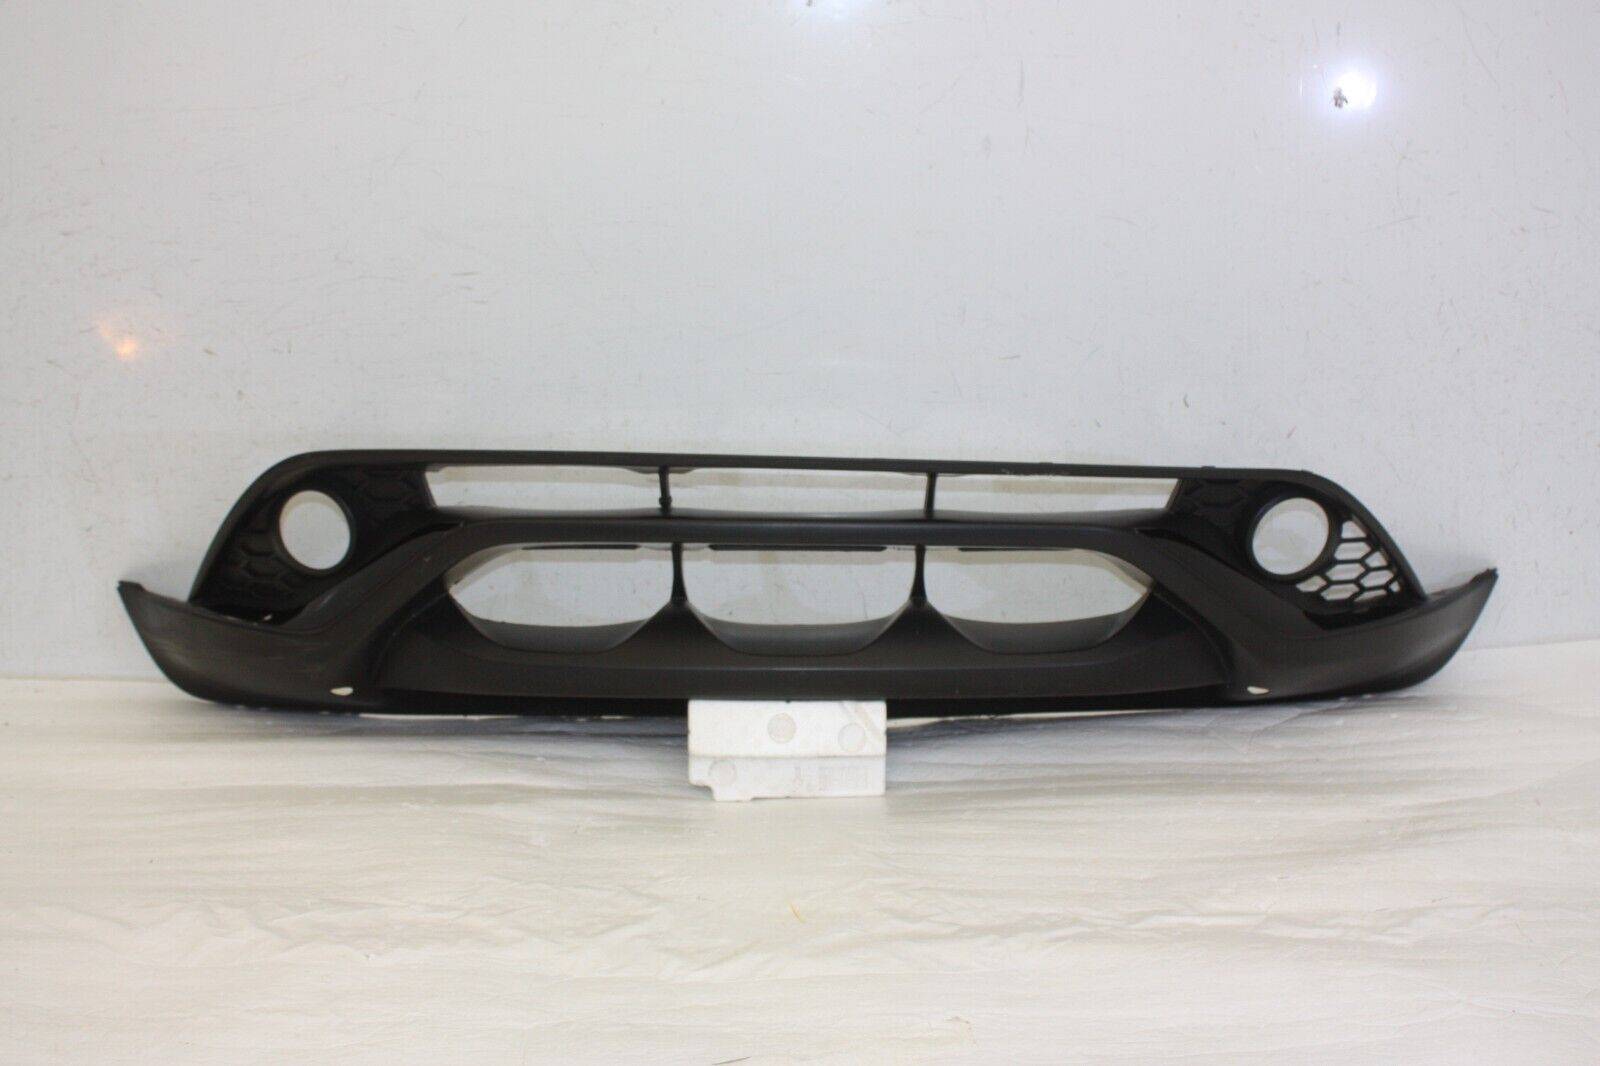 Nissan Juke F15 Front Bumper Lower Section 2014 TO 2019 62026 BV80A Genuine 176418389570